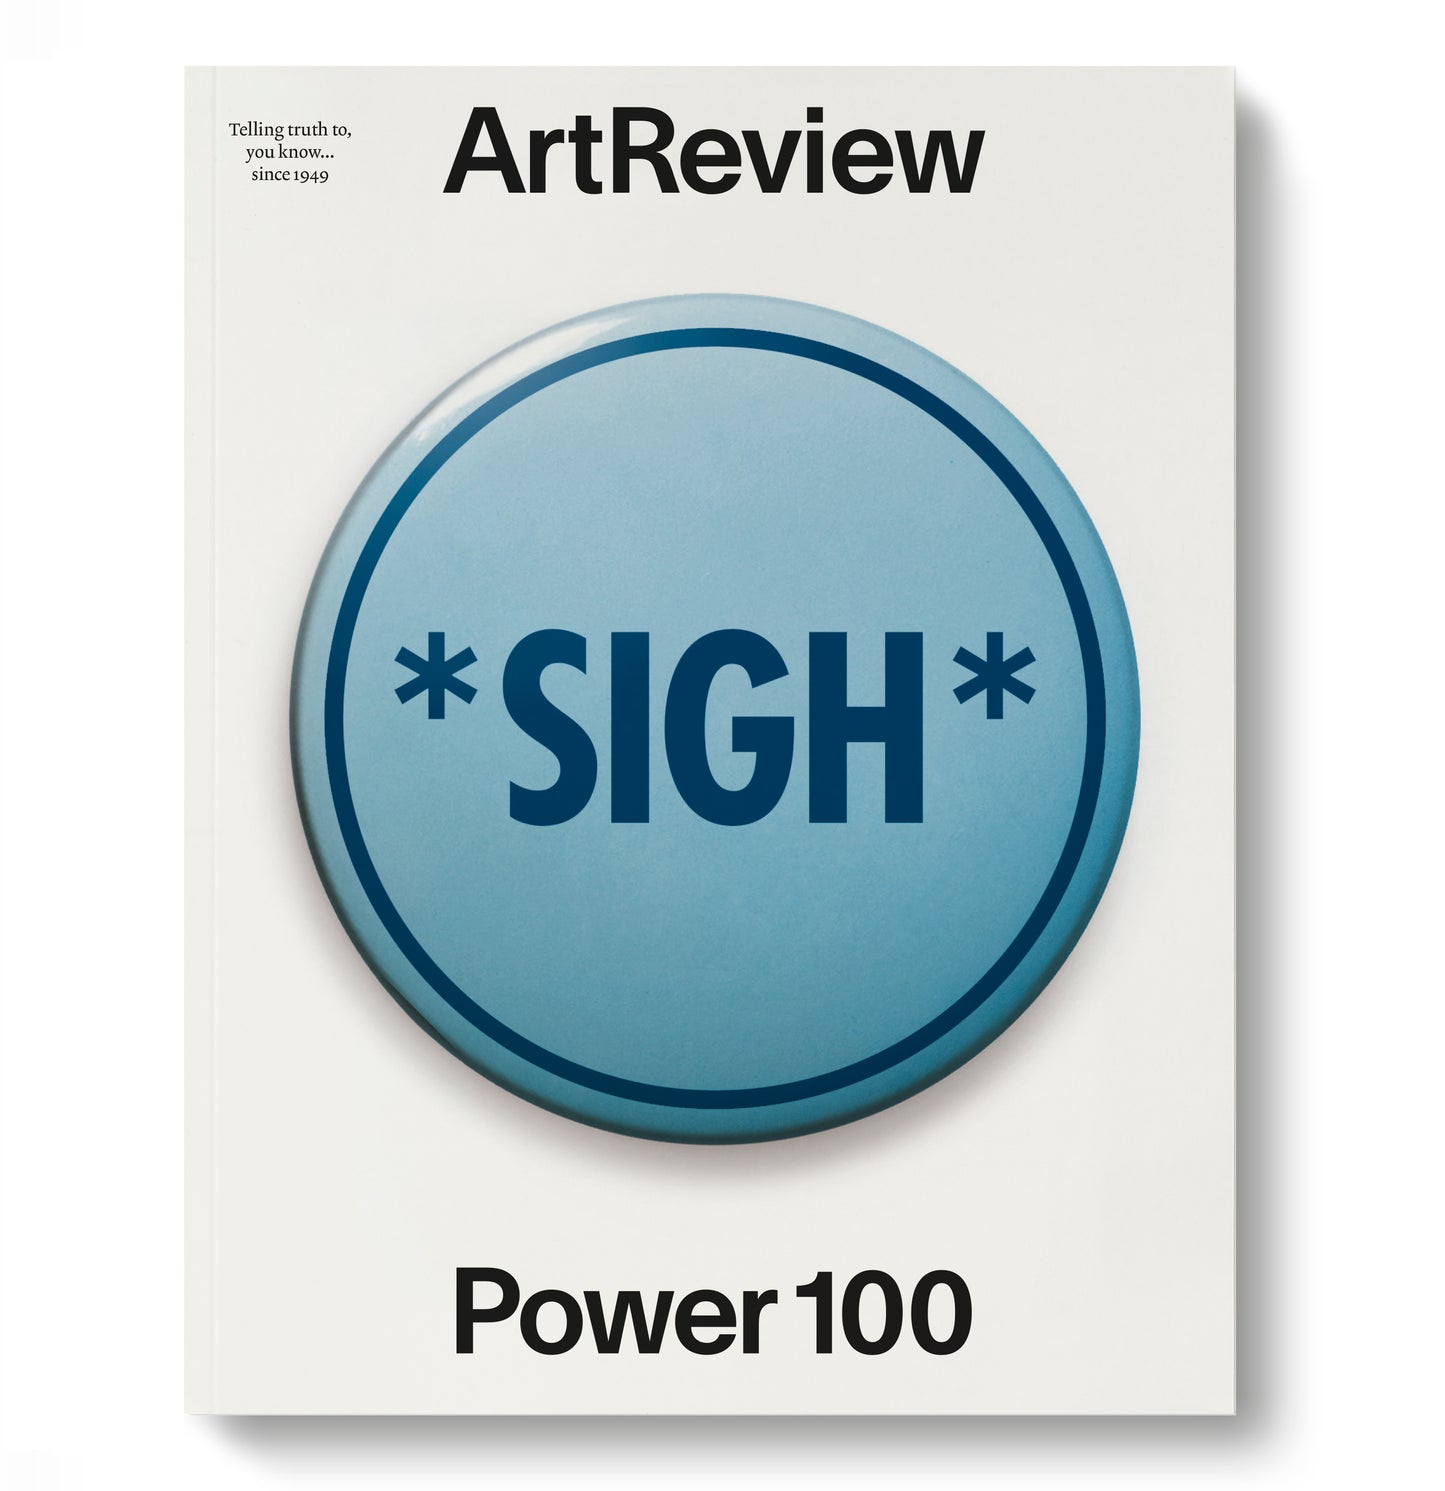 ArtReview November 2019 - Power 100